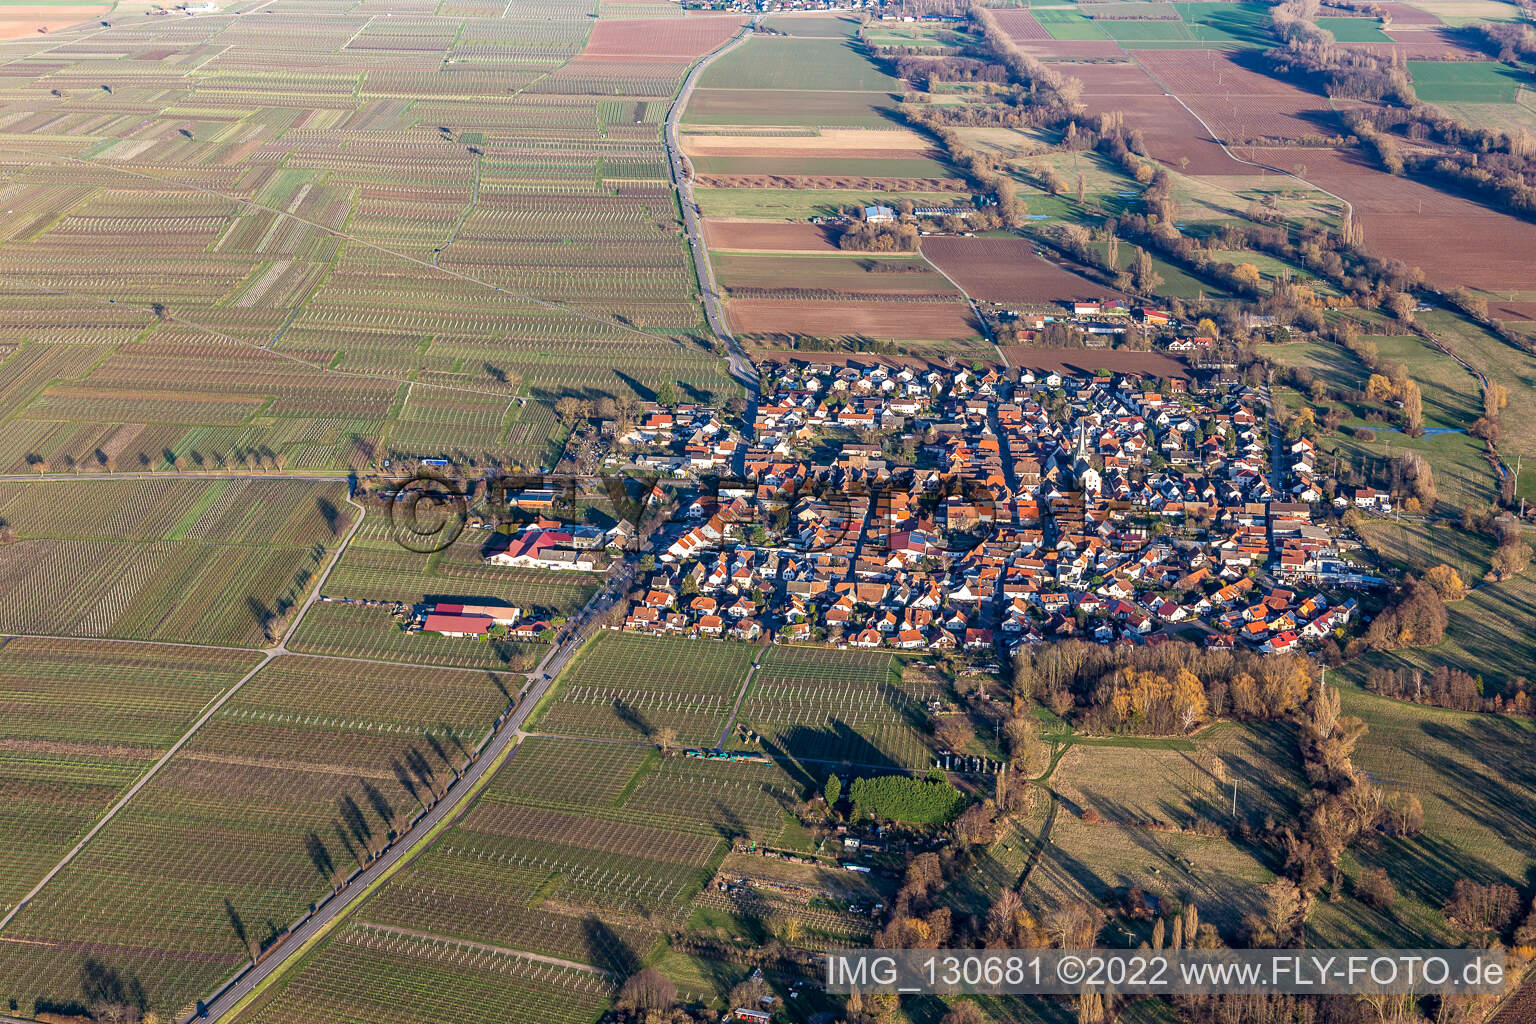 Venningen in the state Rhineland-Palatinate, Germany seen from above